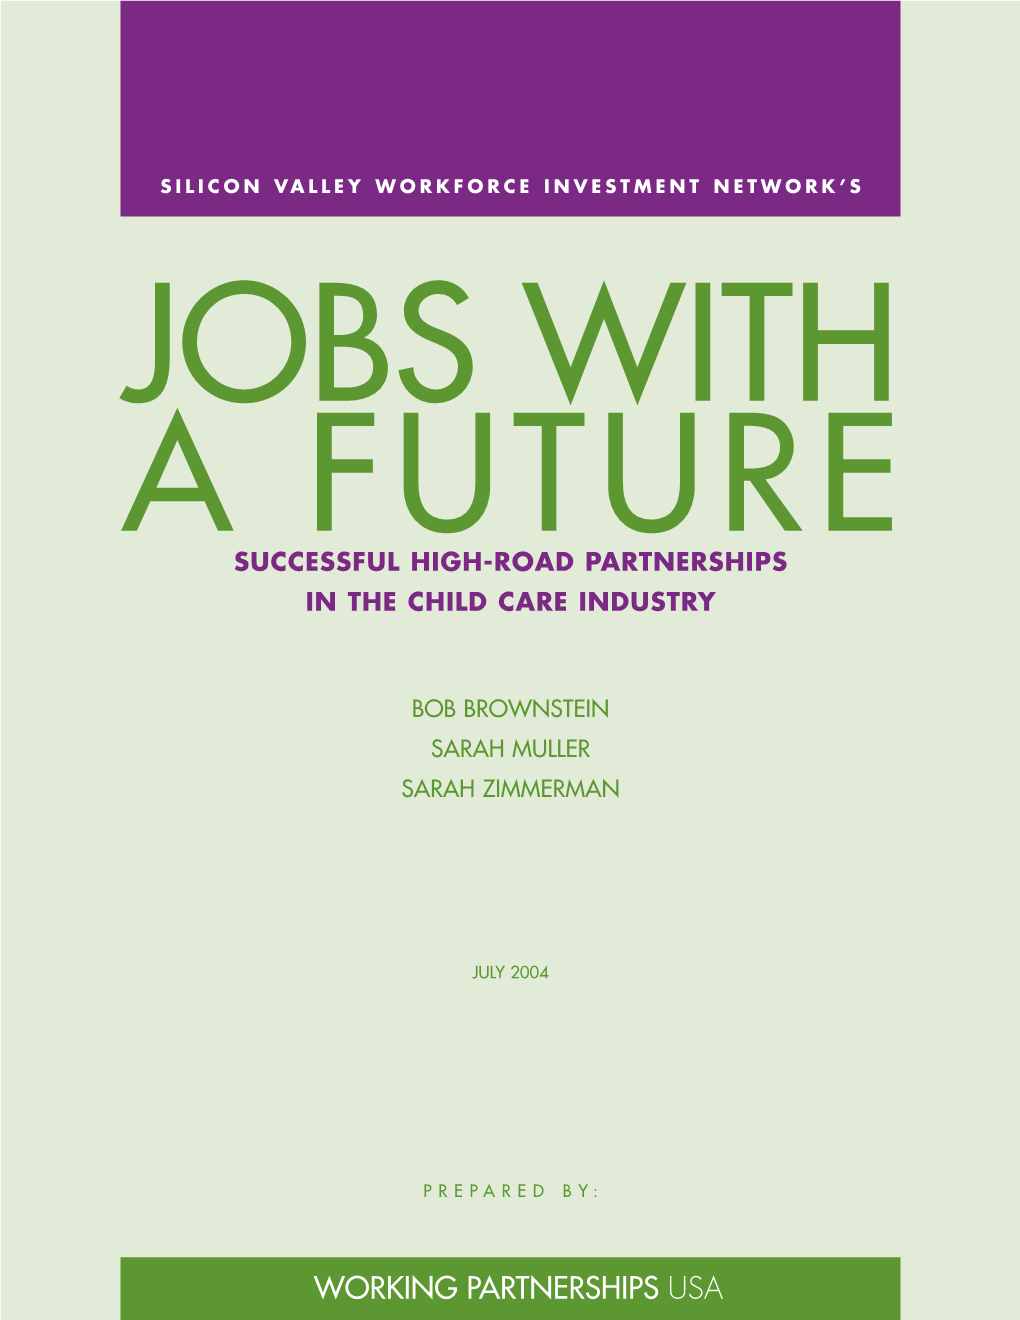 Jobs with a Future Successful High-Road Partnerships in the Child Care Industry